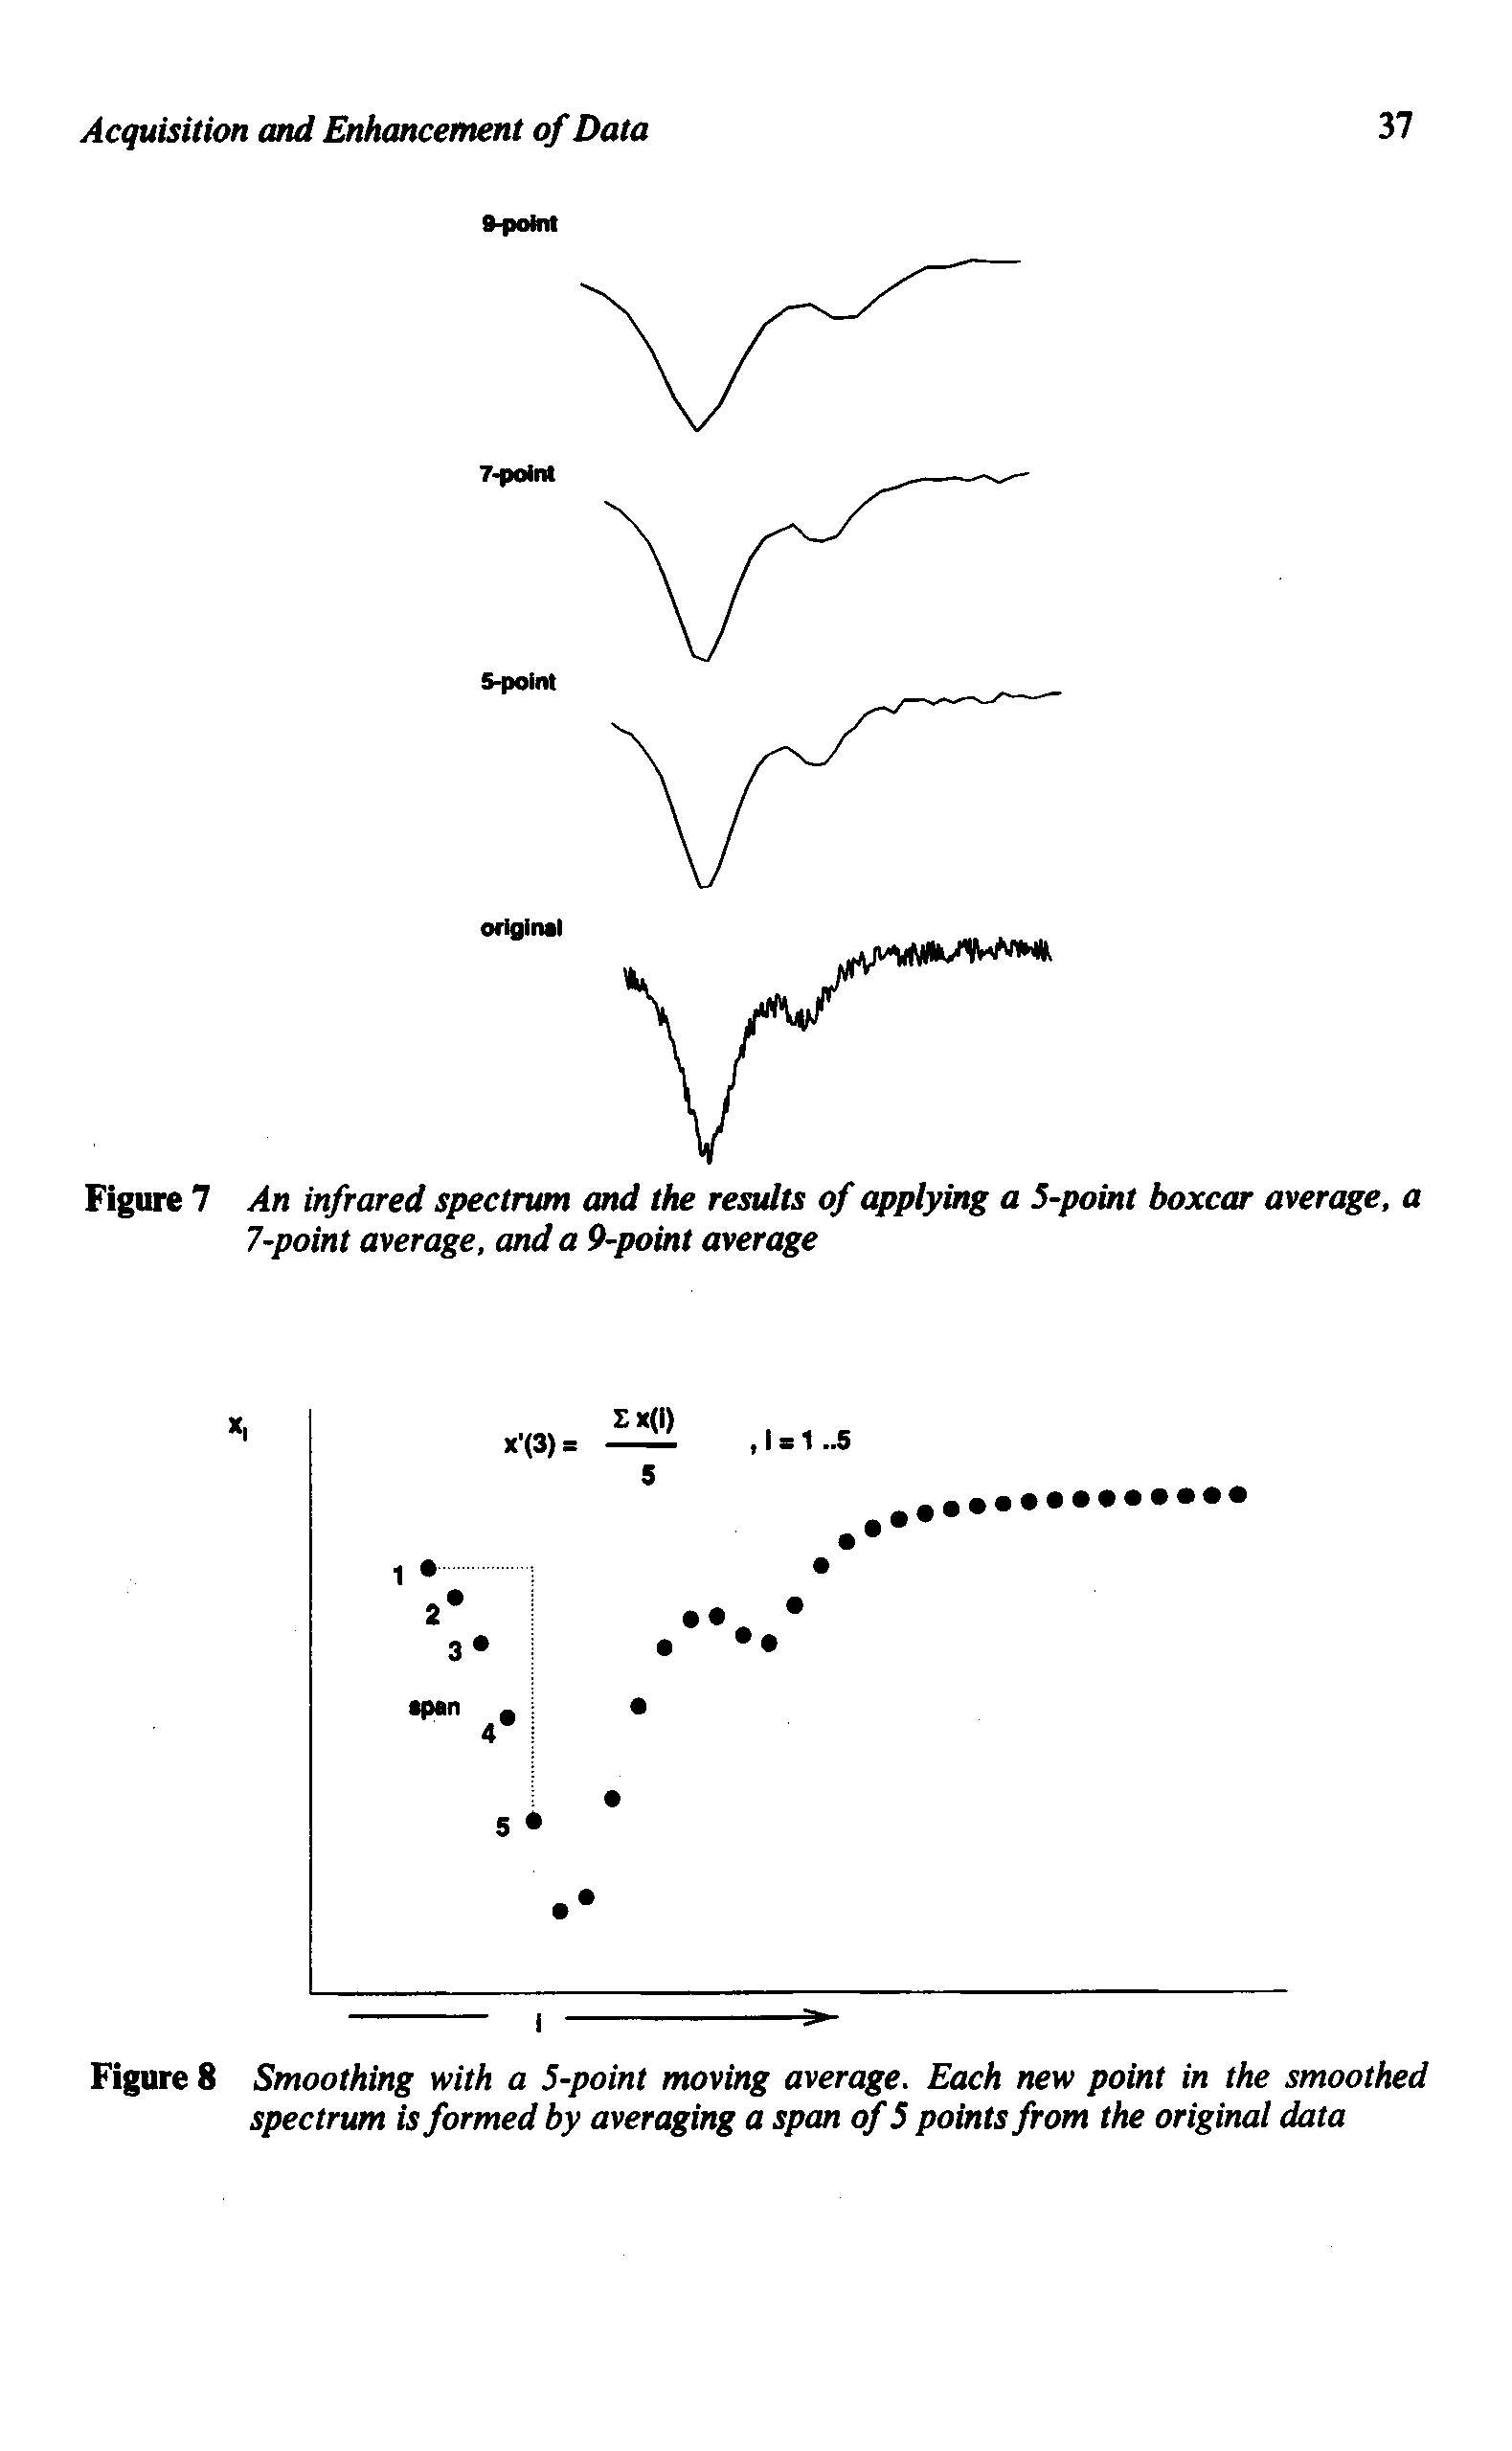 Figure 8 Smoothing with a 5-point moving average. Each new point in the smoothed spectrum is formed by averaging a span of 5 points from the original data...